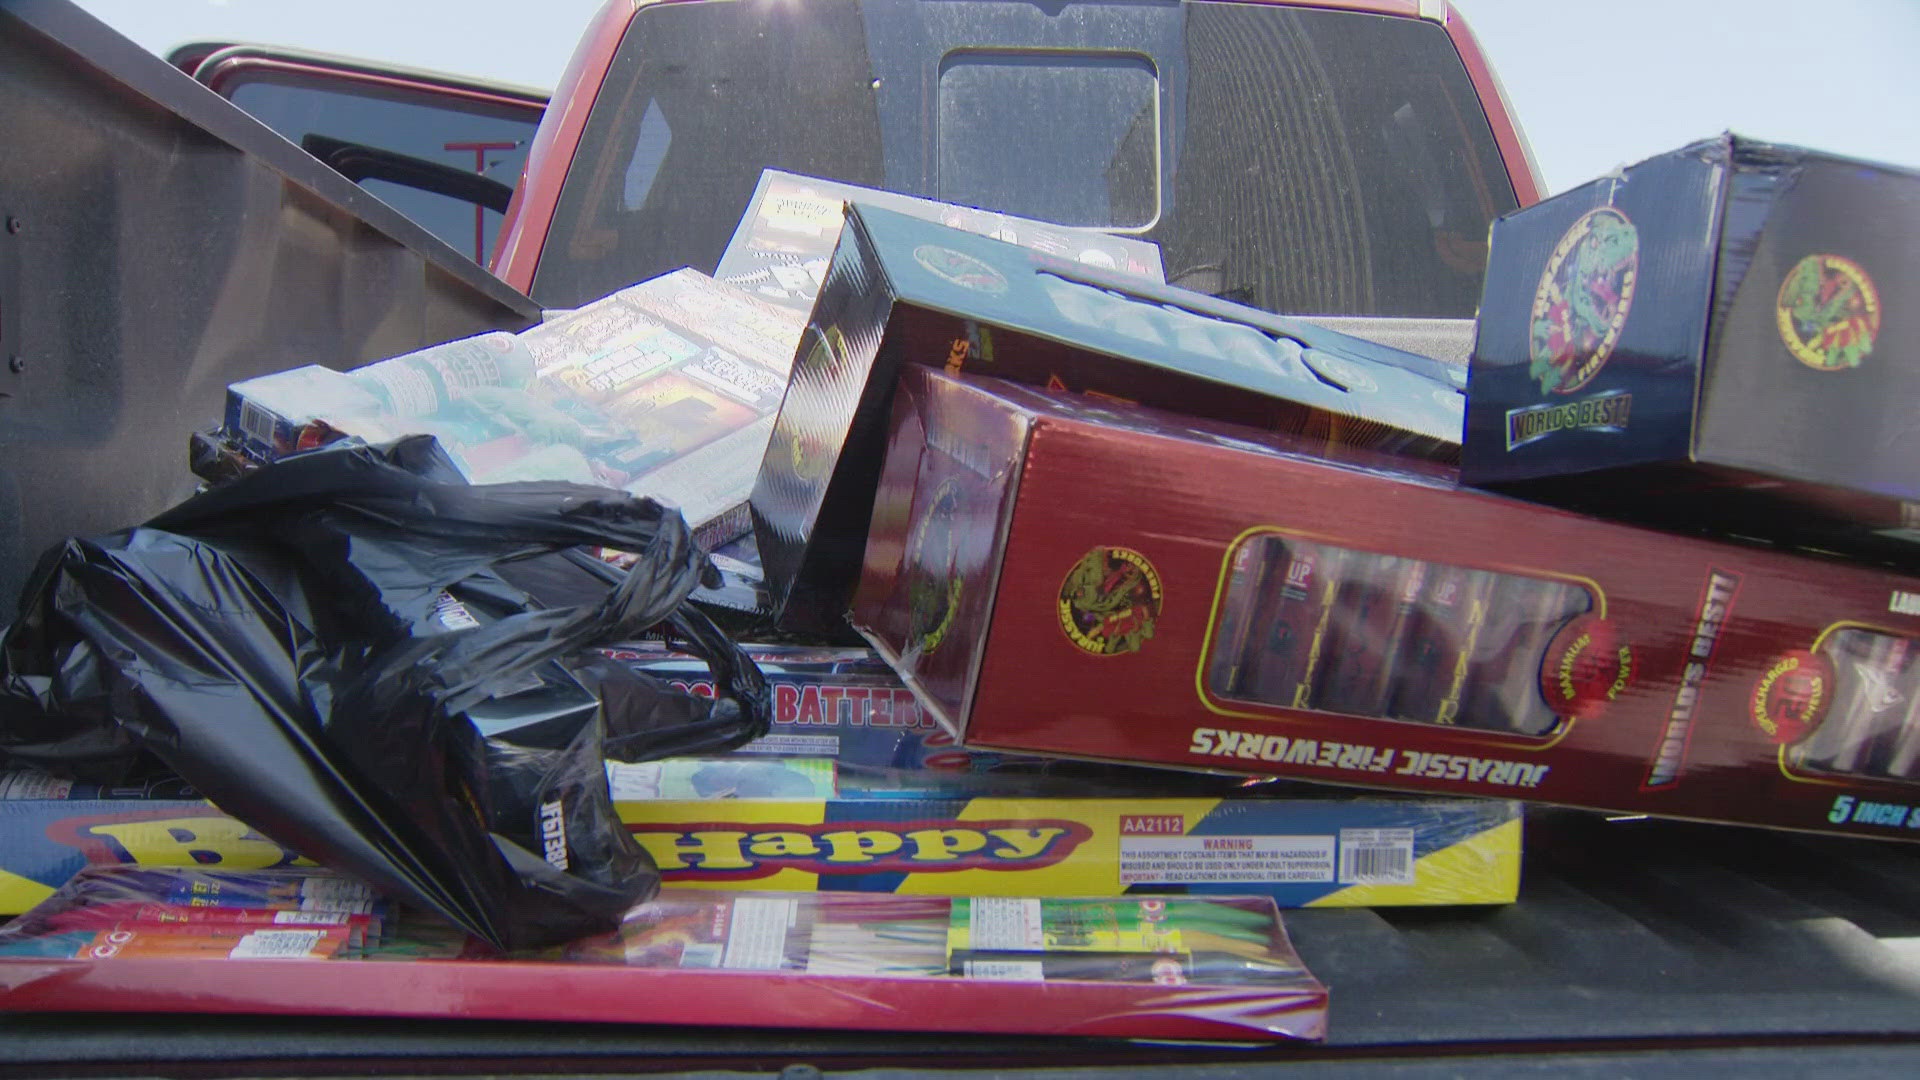 Most fireworks are illegal to sell in Colorado, so people drive to Wyoming where they're legal.